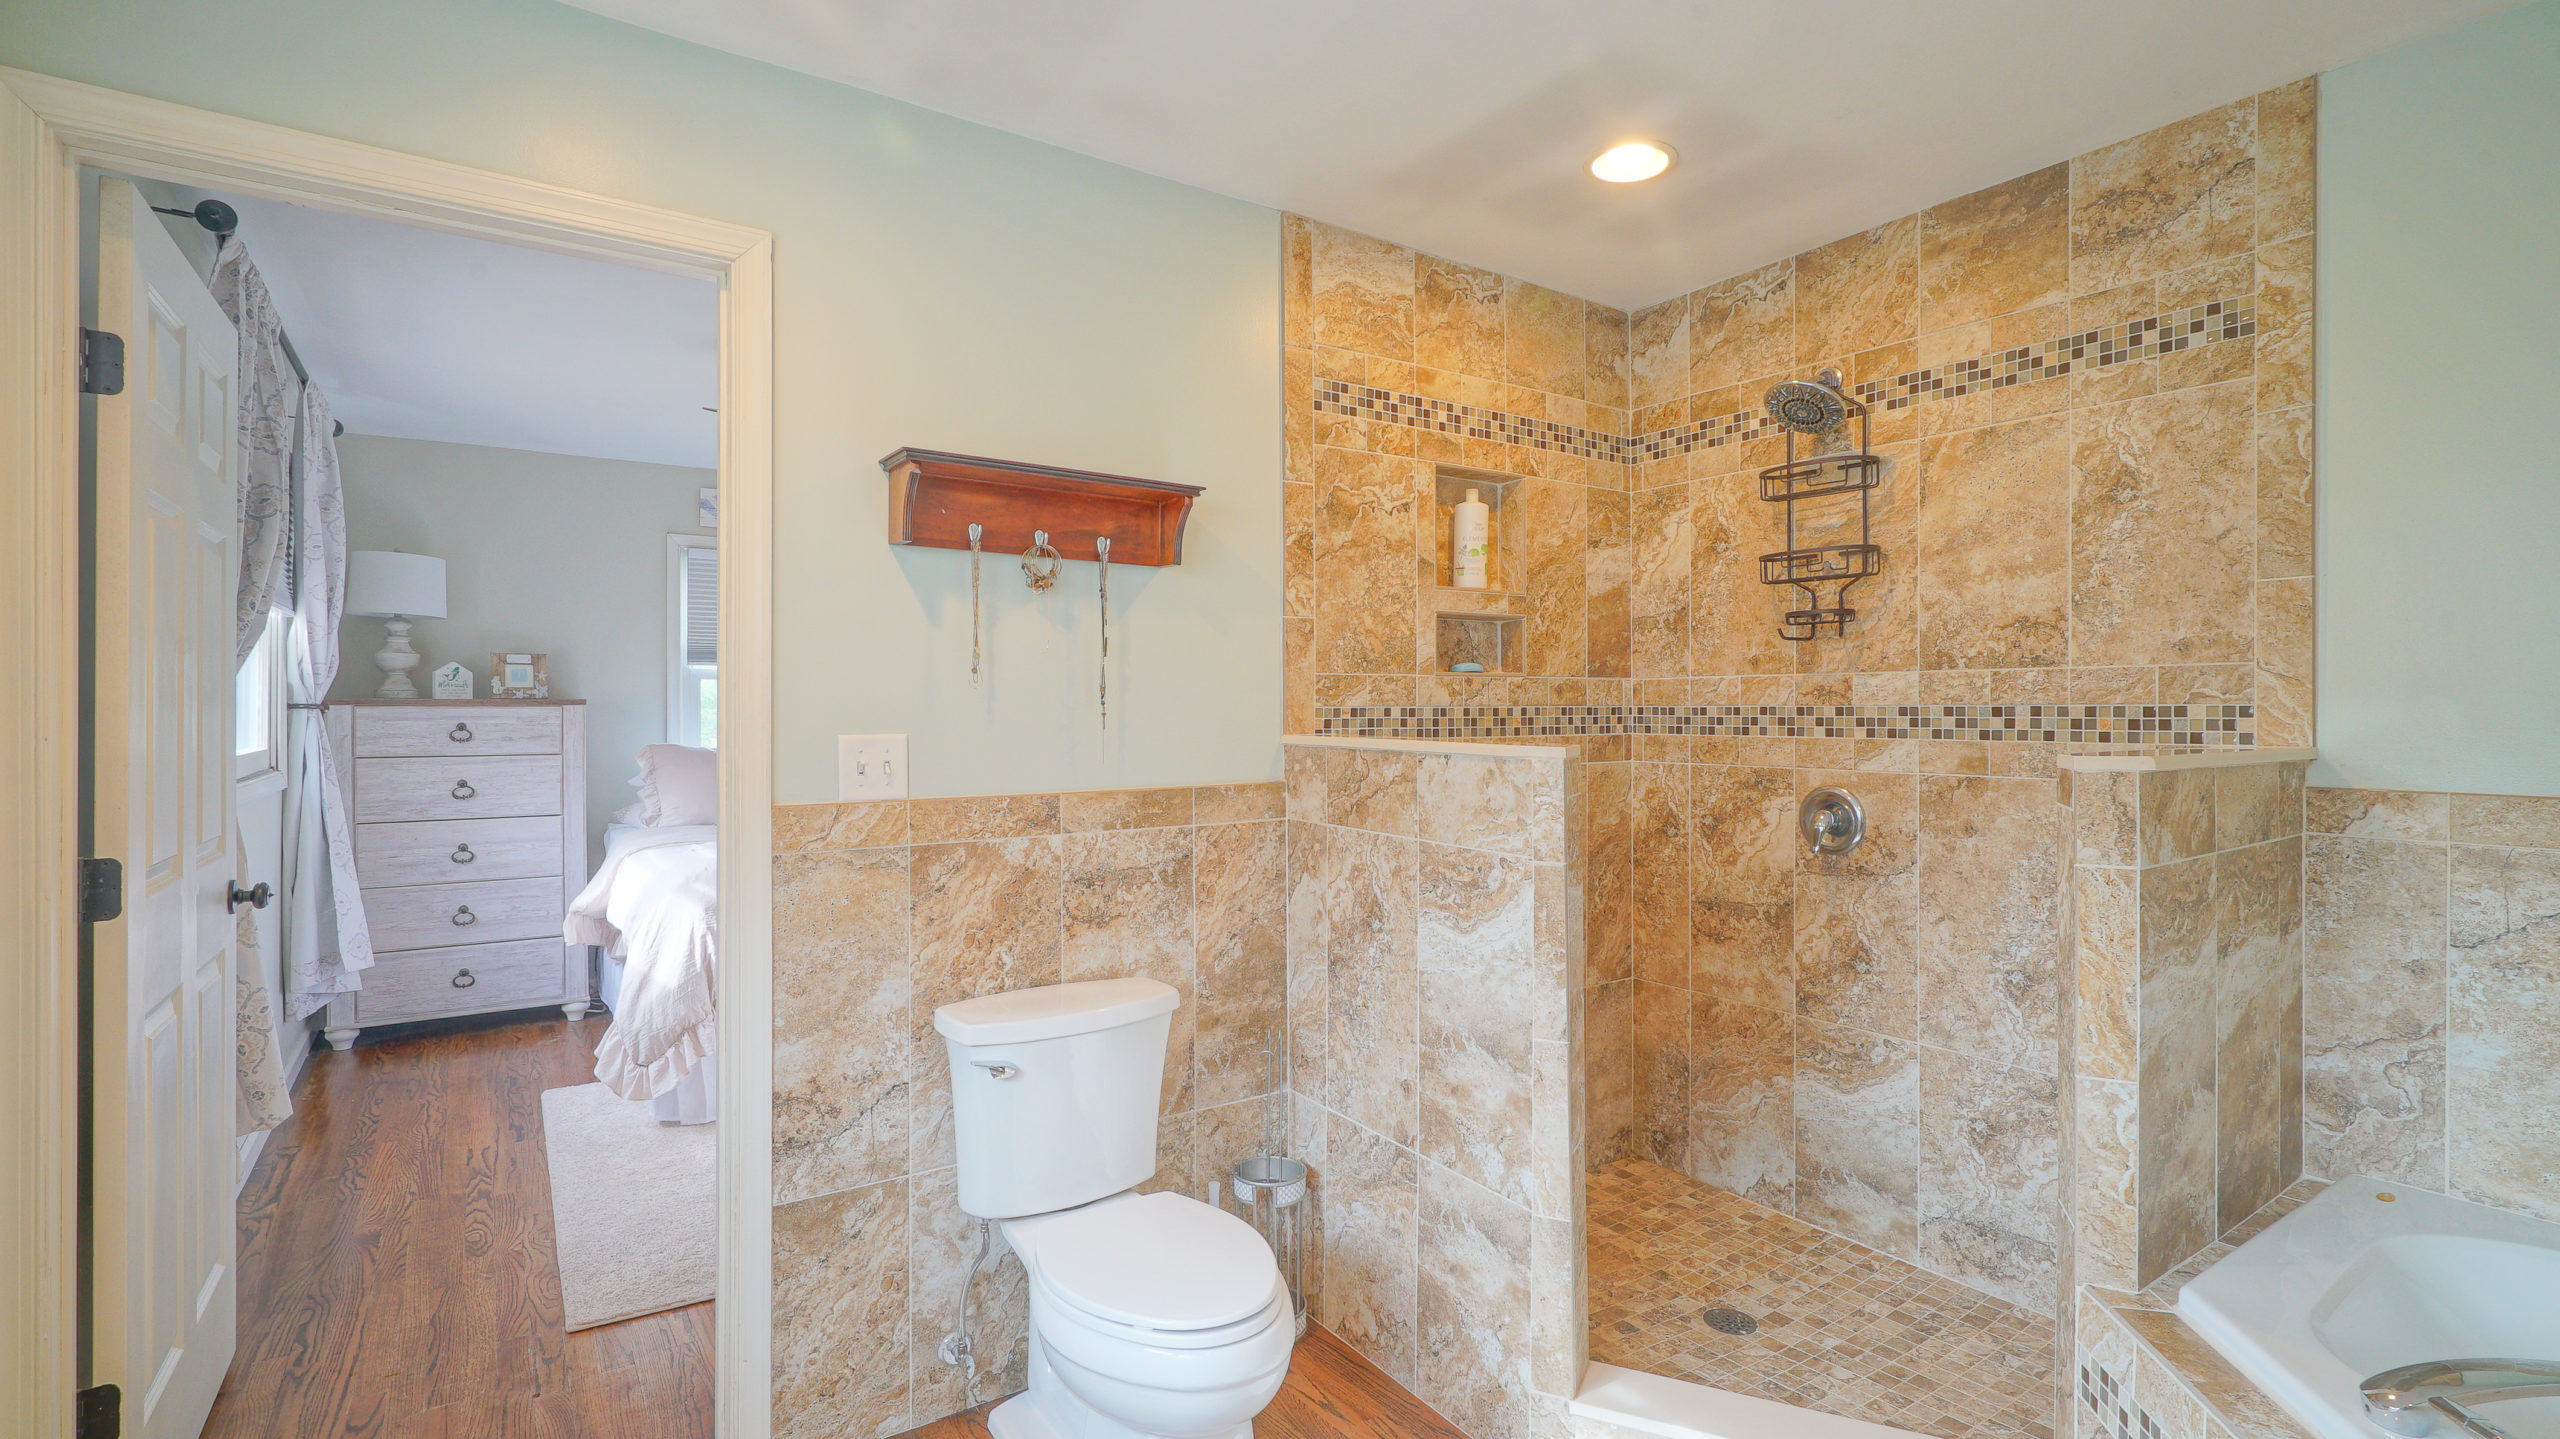 View of Bathroom in Chestertown Maryland House for Sale